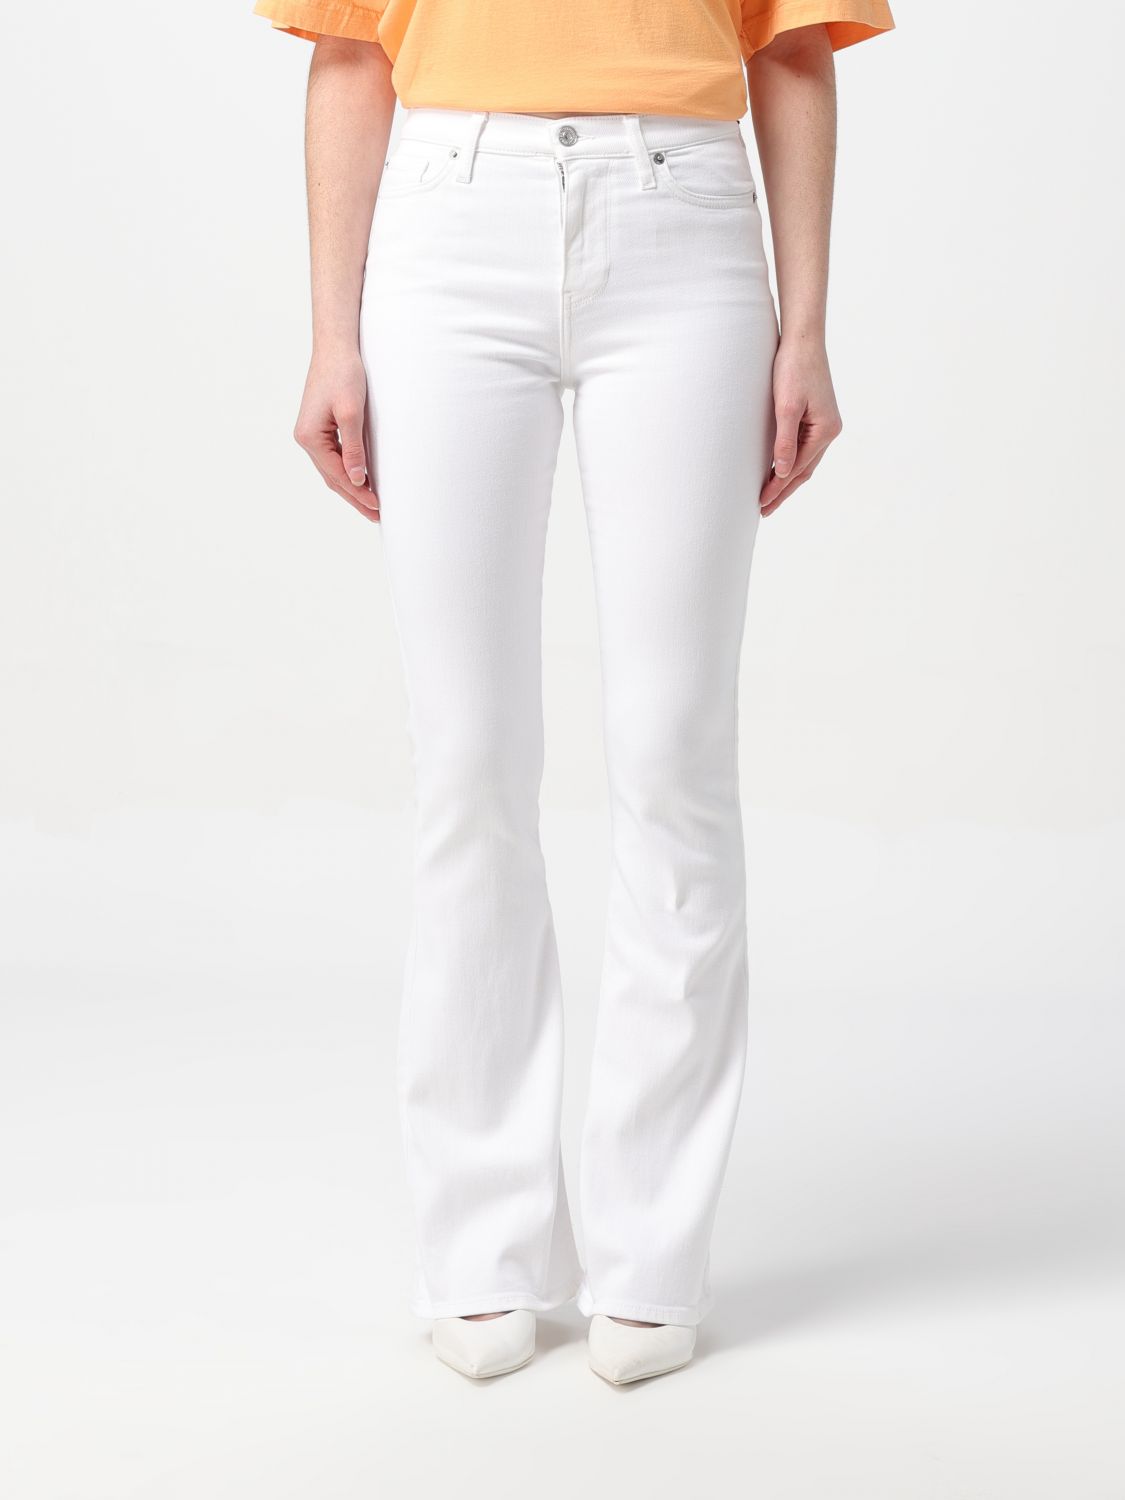 jeans 7 for all mankind woman colour white